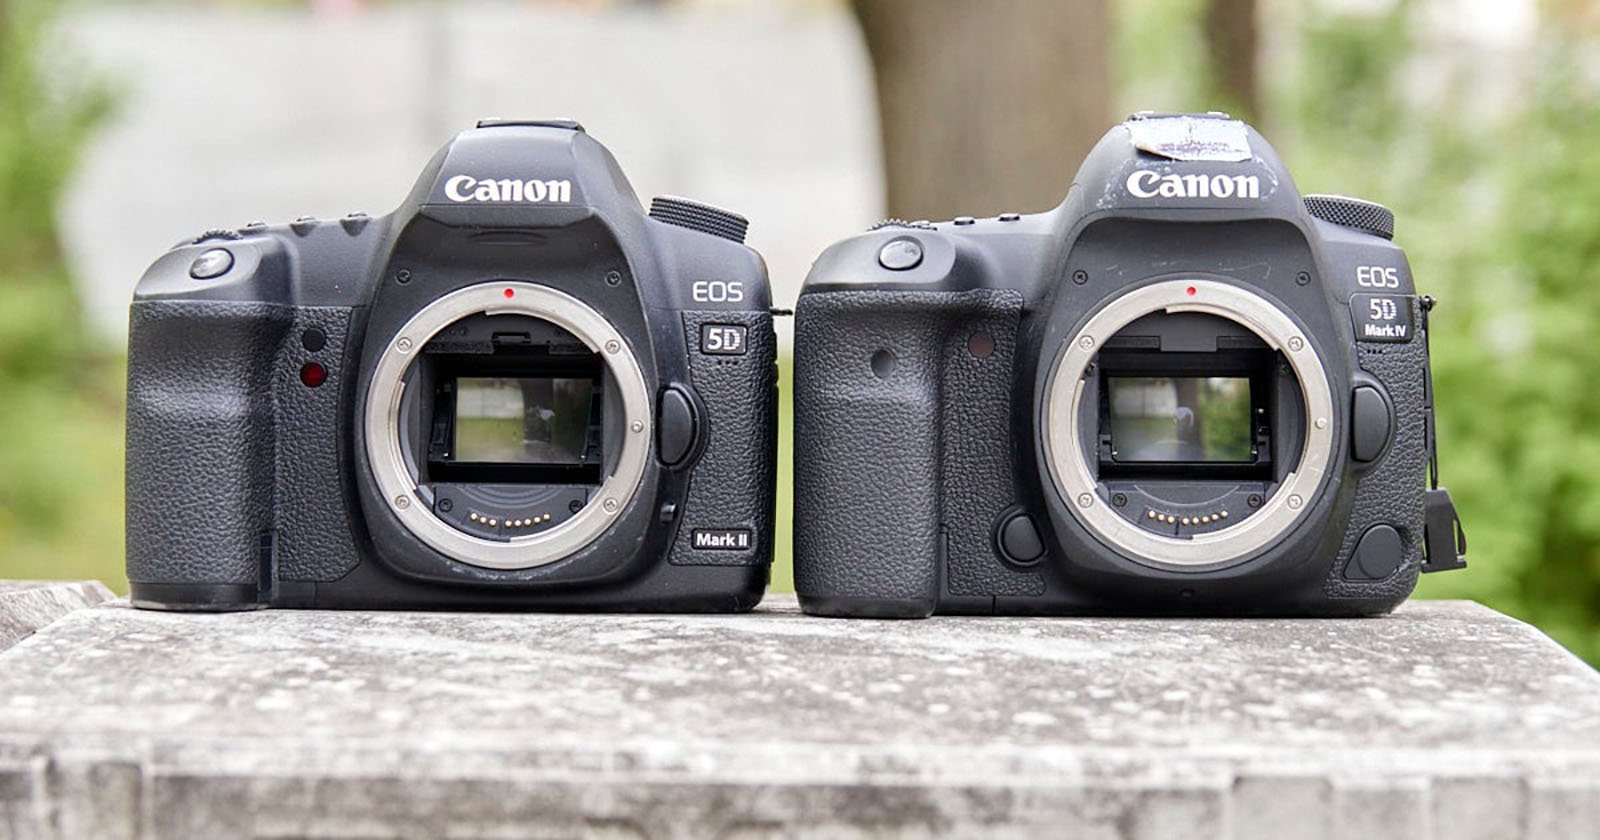 The Most Popular Cameras in the World as Revealed by Flickr Data